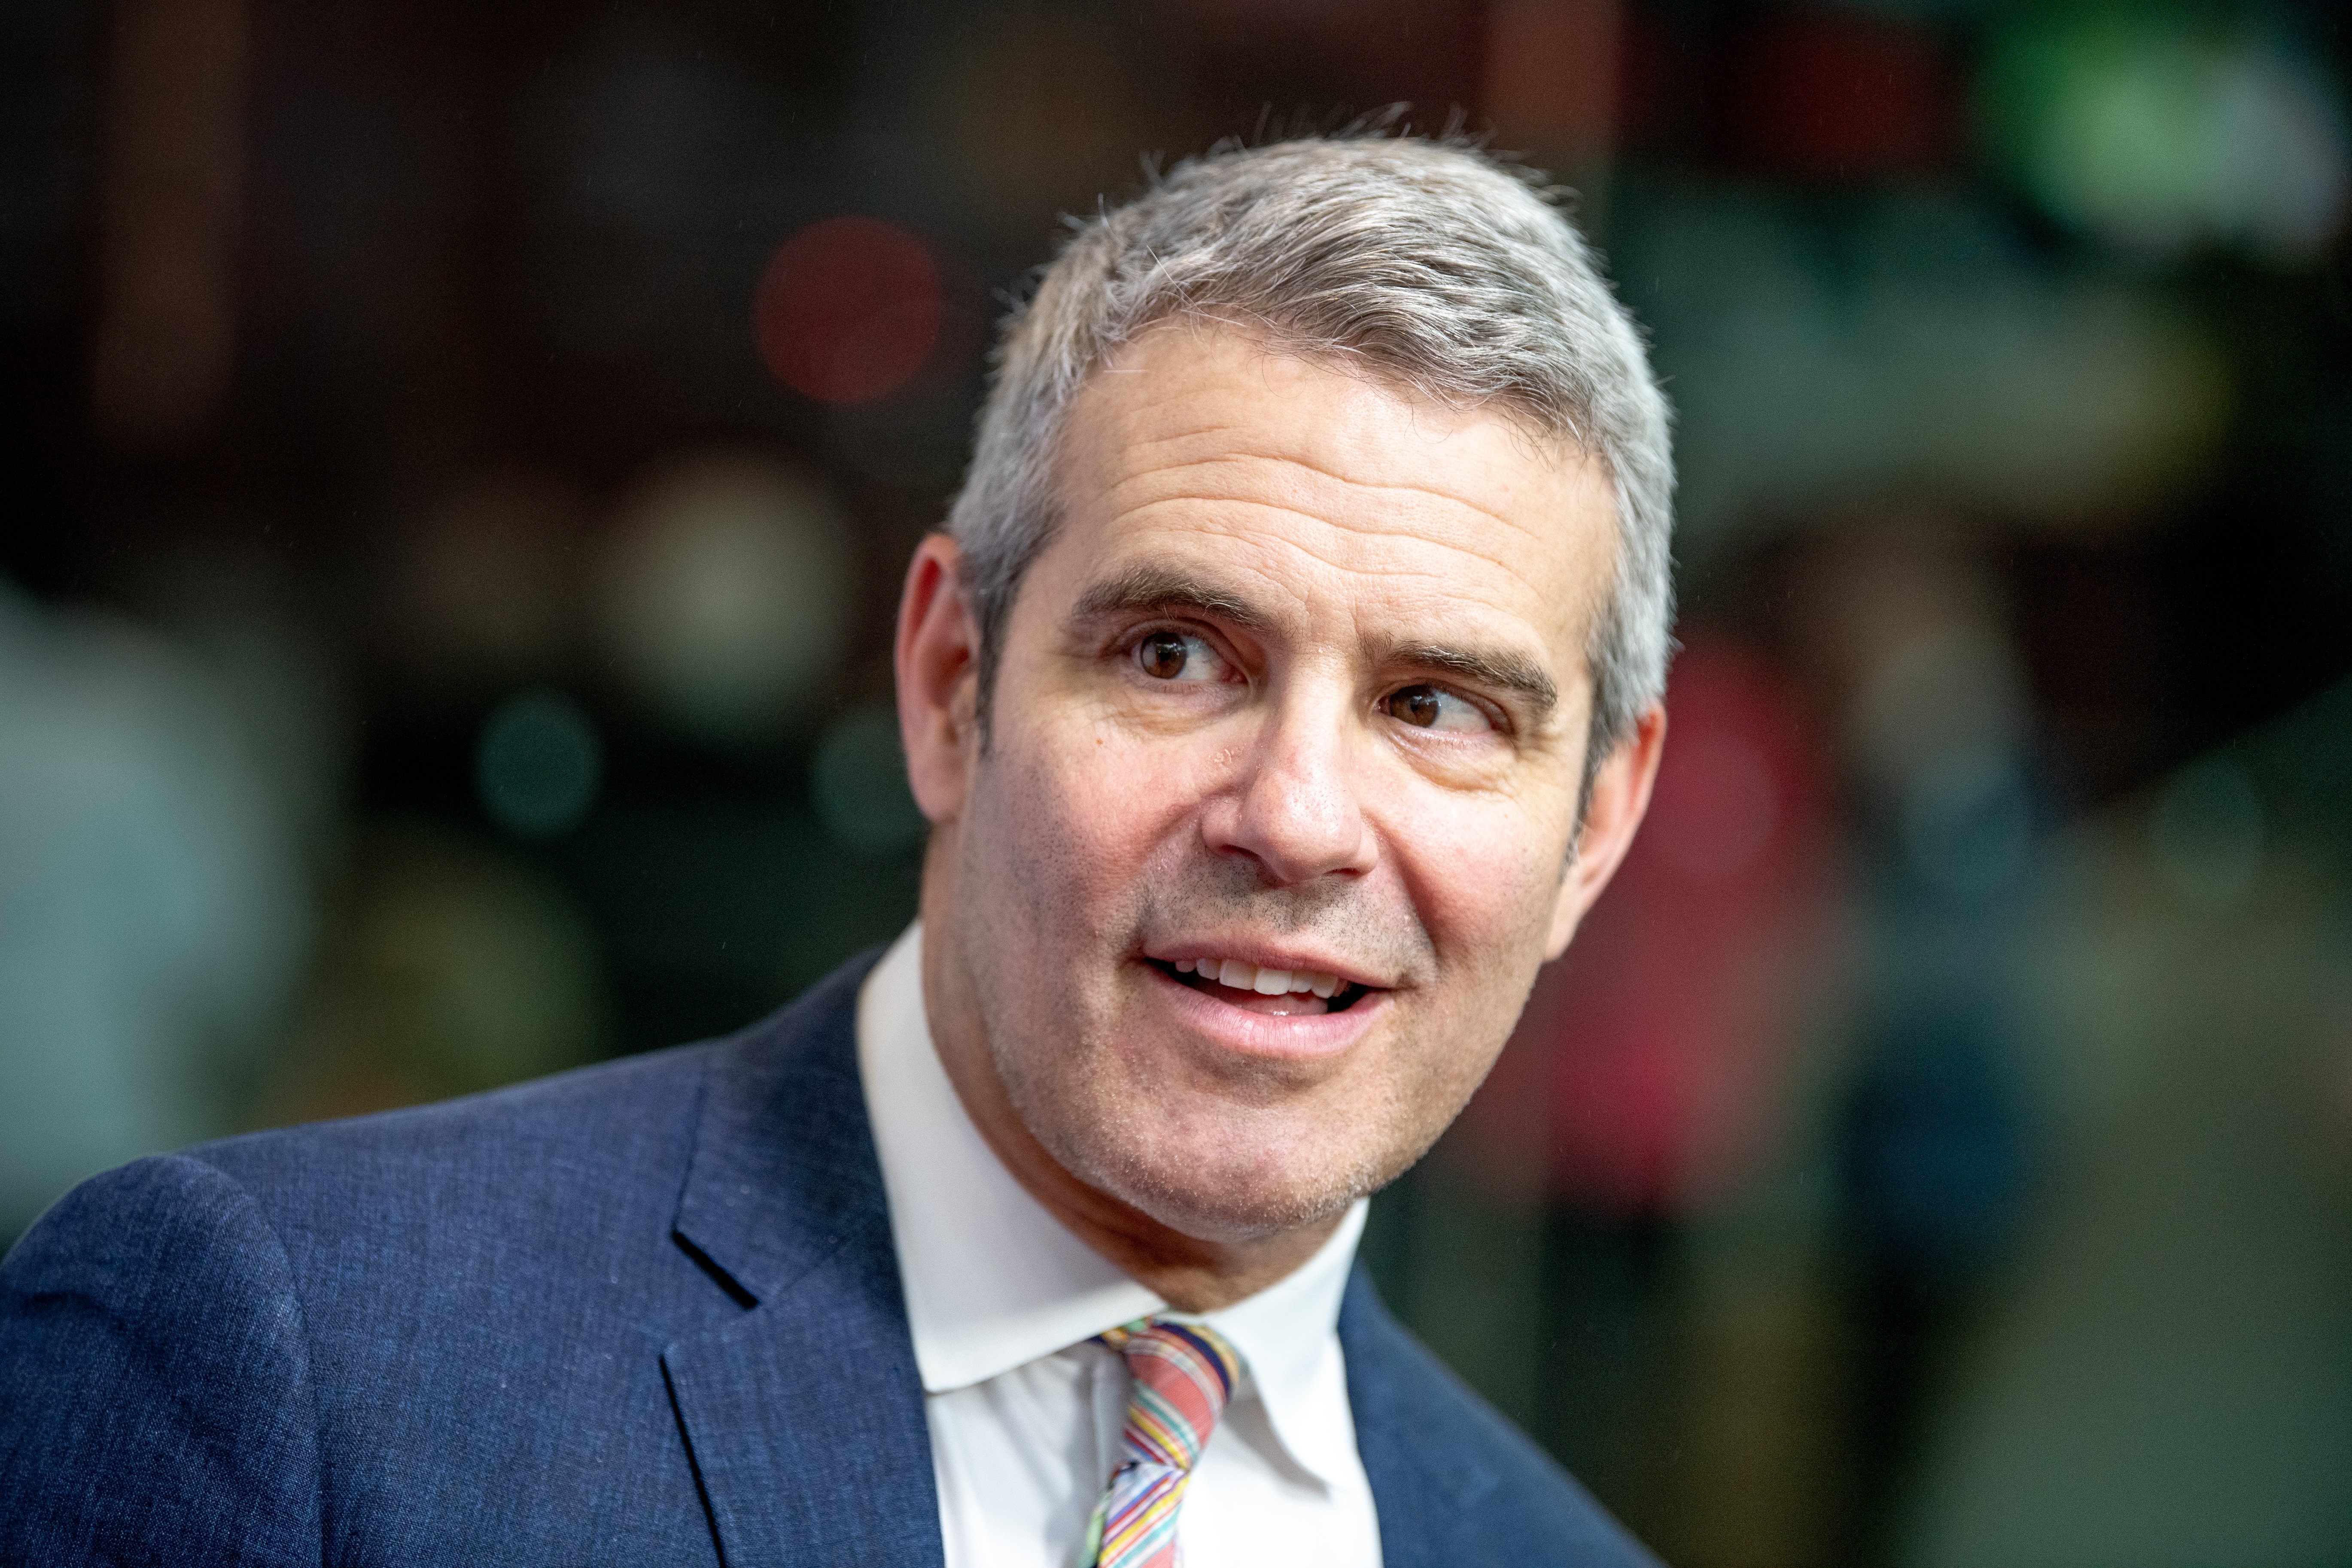 Andy Cohen on June 19, 2019 in New York City | Source: Getty Images